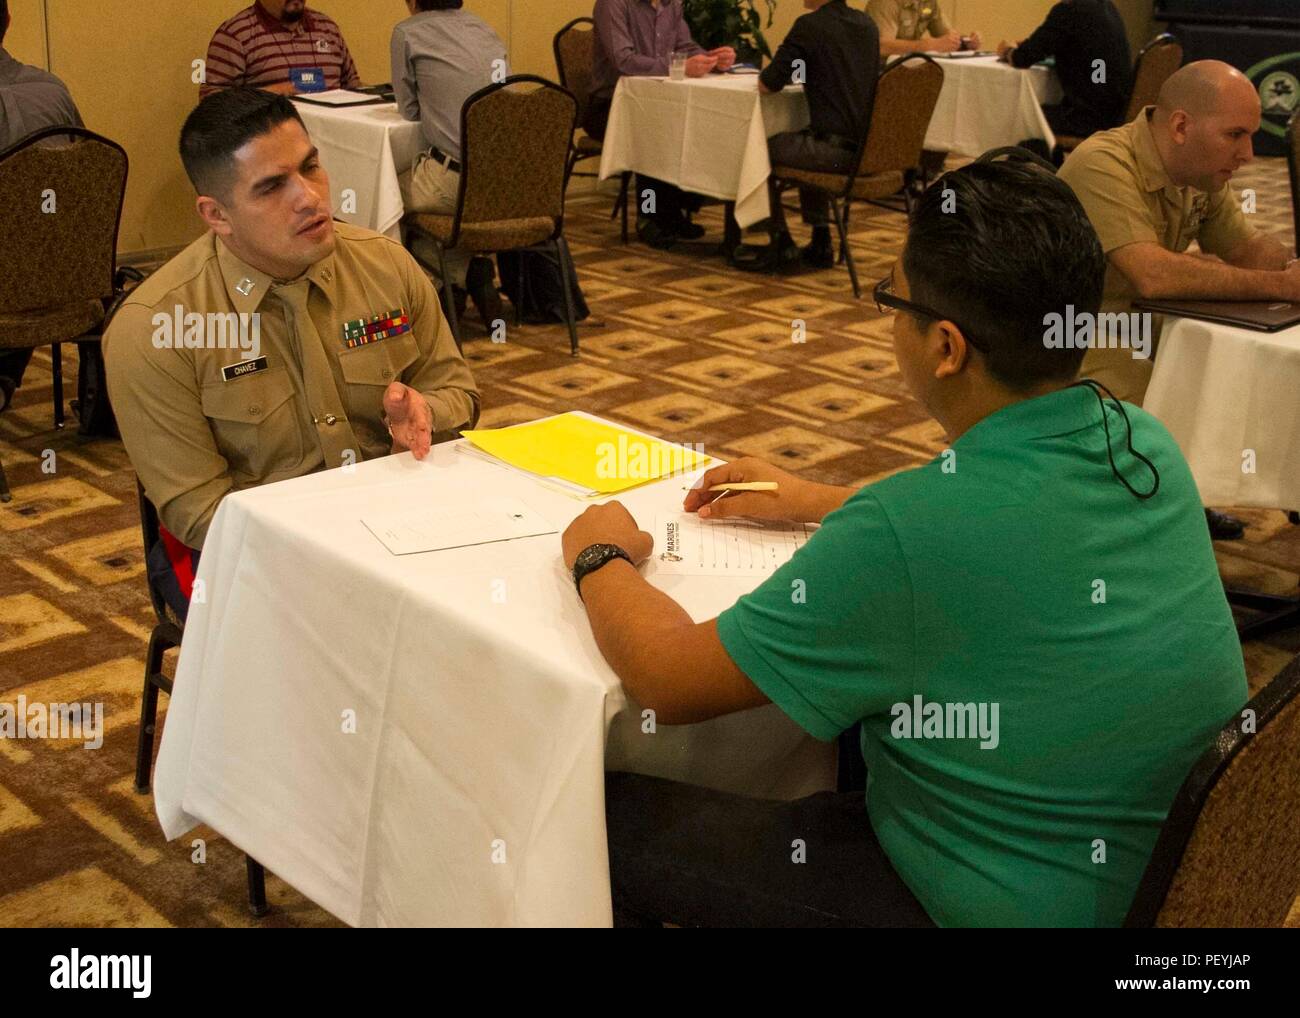 Captain Juan Chavez speaks to a student about different career opportunities available in the Marine Corps during the Mexican American Engineers and Scientists reverse career fair at the DoubleTree by Hilton Hotel in San Antonio, Feb. 18, 2016. Chavez currently serves as a Recruiting Support Officer at Recruiting Station Albuquerque. Partnering with influential Latino organizations like MAES provides the Marine Corps with the ability to build relationships with influential community leaders and transform them into brand ambassadors of the Marine Corps. Stock Photo